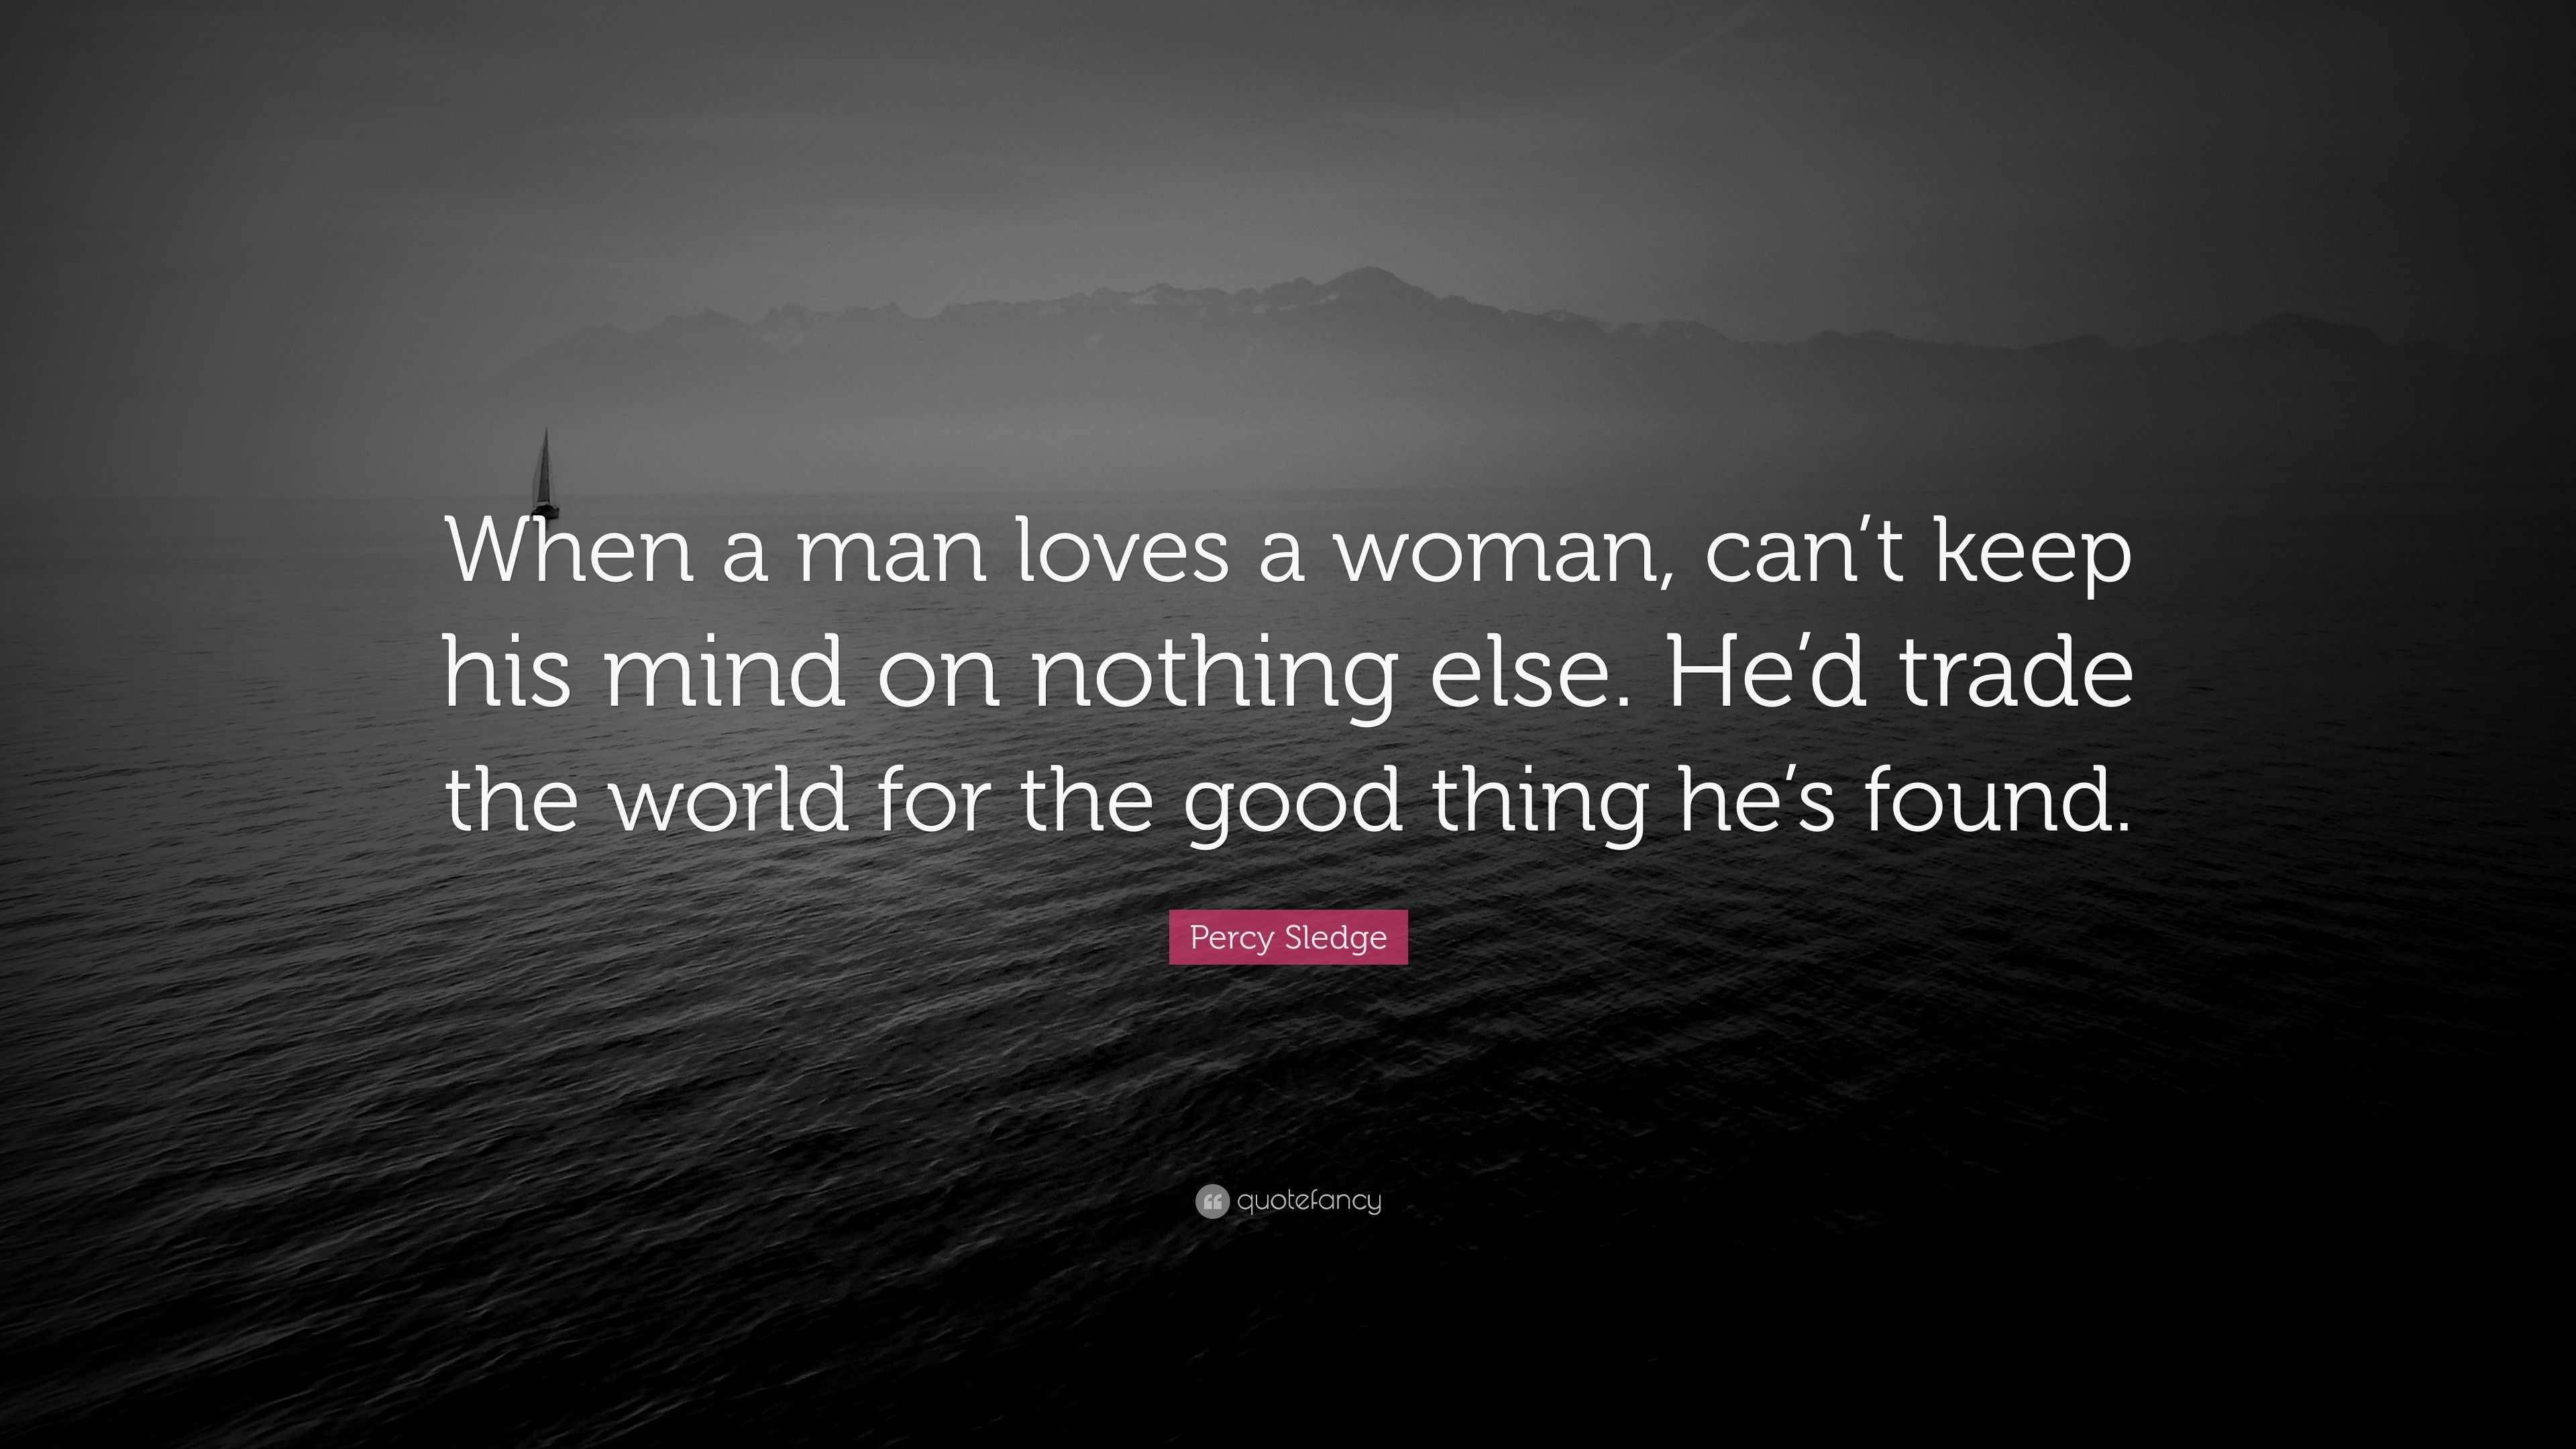 Percy Sledge Quote “When a man loves a woman can t keep